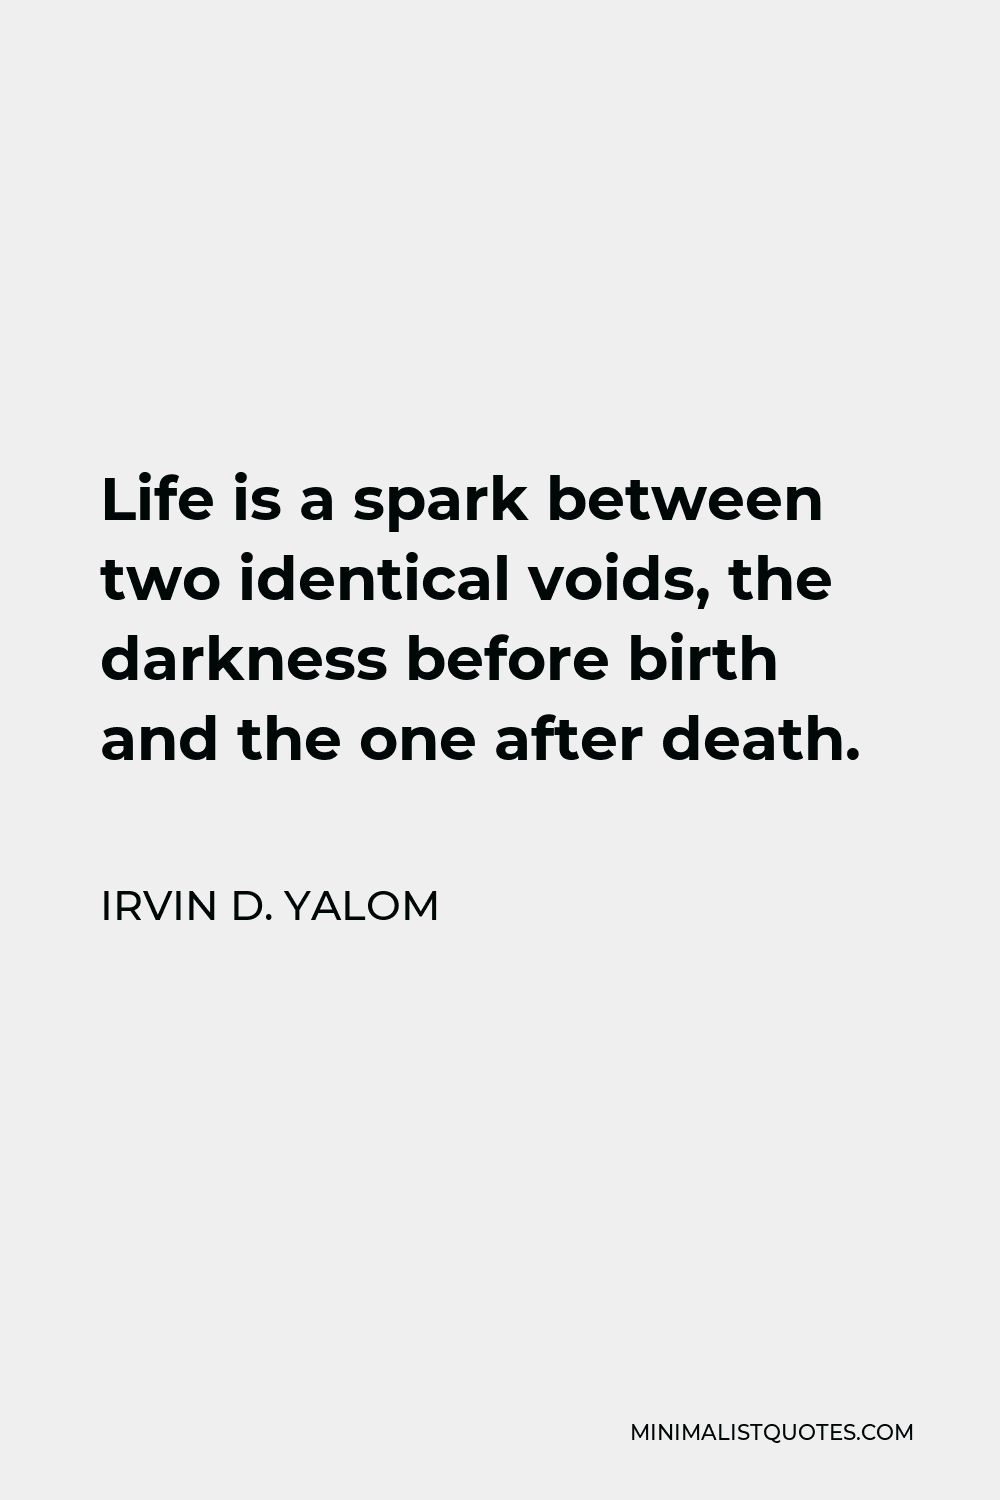 Irvin D. Yalom Quote - Life is a spark between two identical voids, the darkness before birth and the one after death.